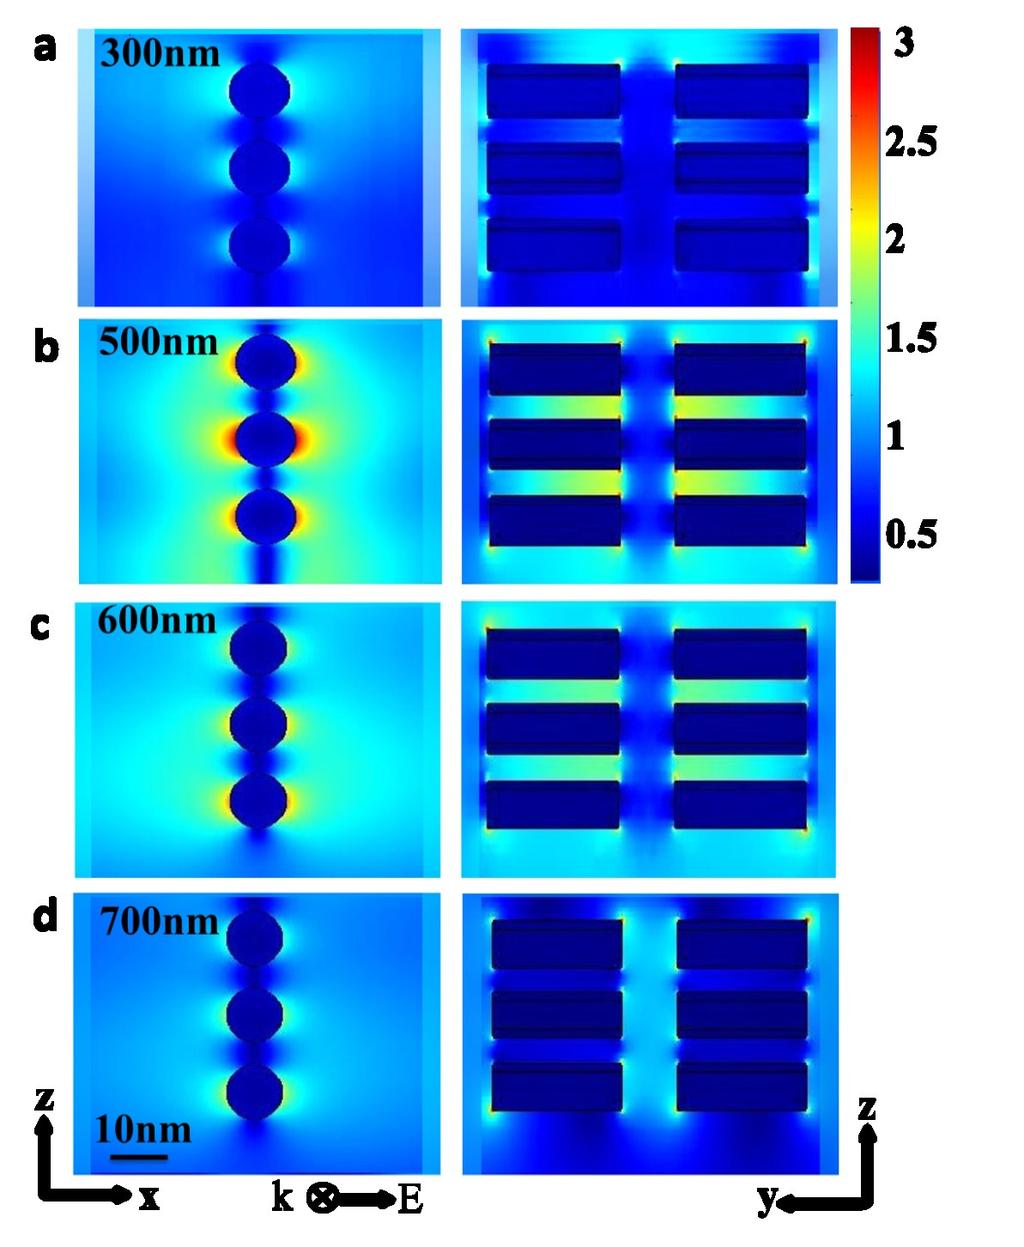 Fig. S10. FEM-simulated electric field distribution of MoS 2 @TiO 2 heterostructure under (a) 300 nm, (b) 500 nm, (c) 600 nm, (d) 700 nm excitation.